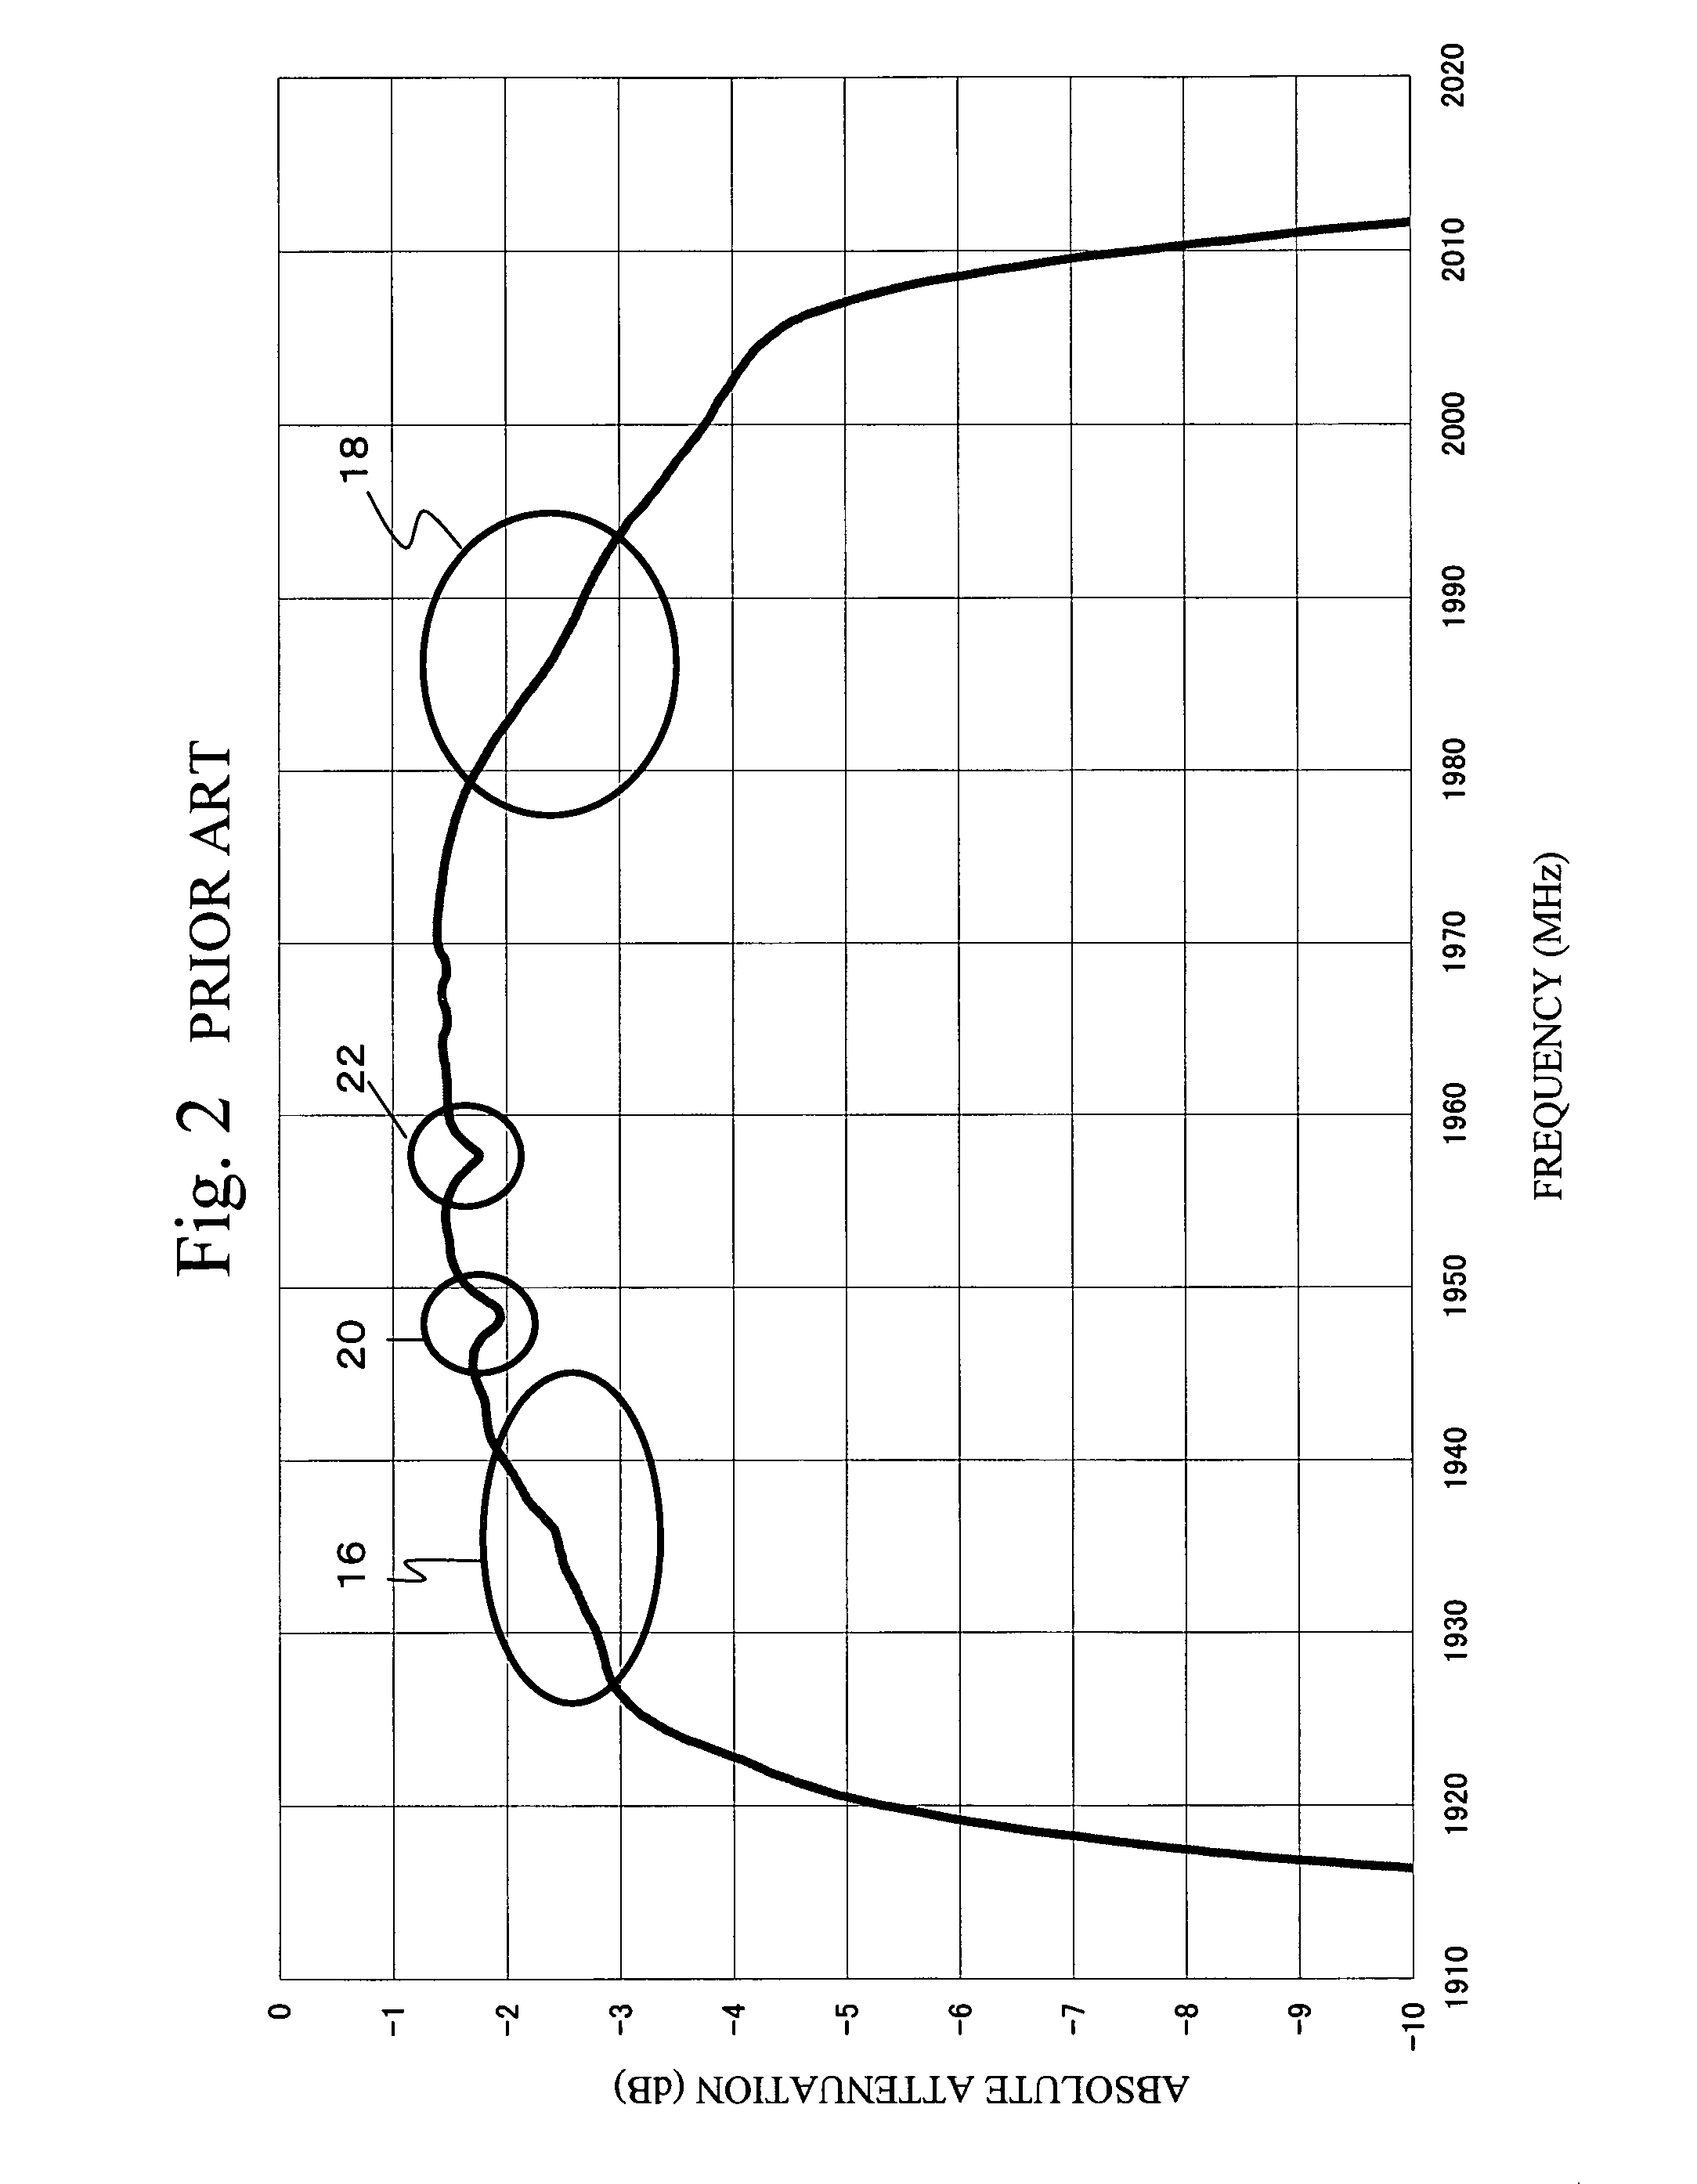 Surface acoustic wave ladder filter device having resonators with different electrode pitches and electrostatic capacitances